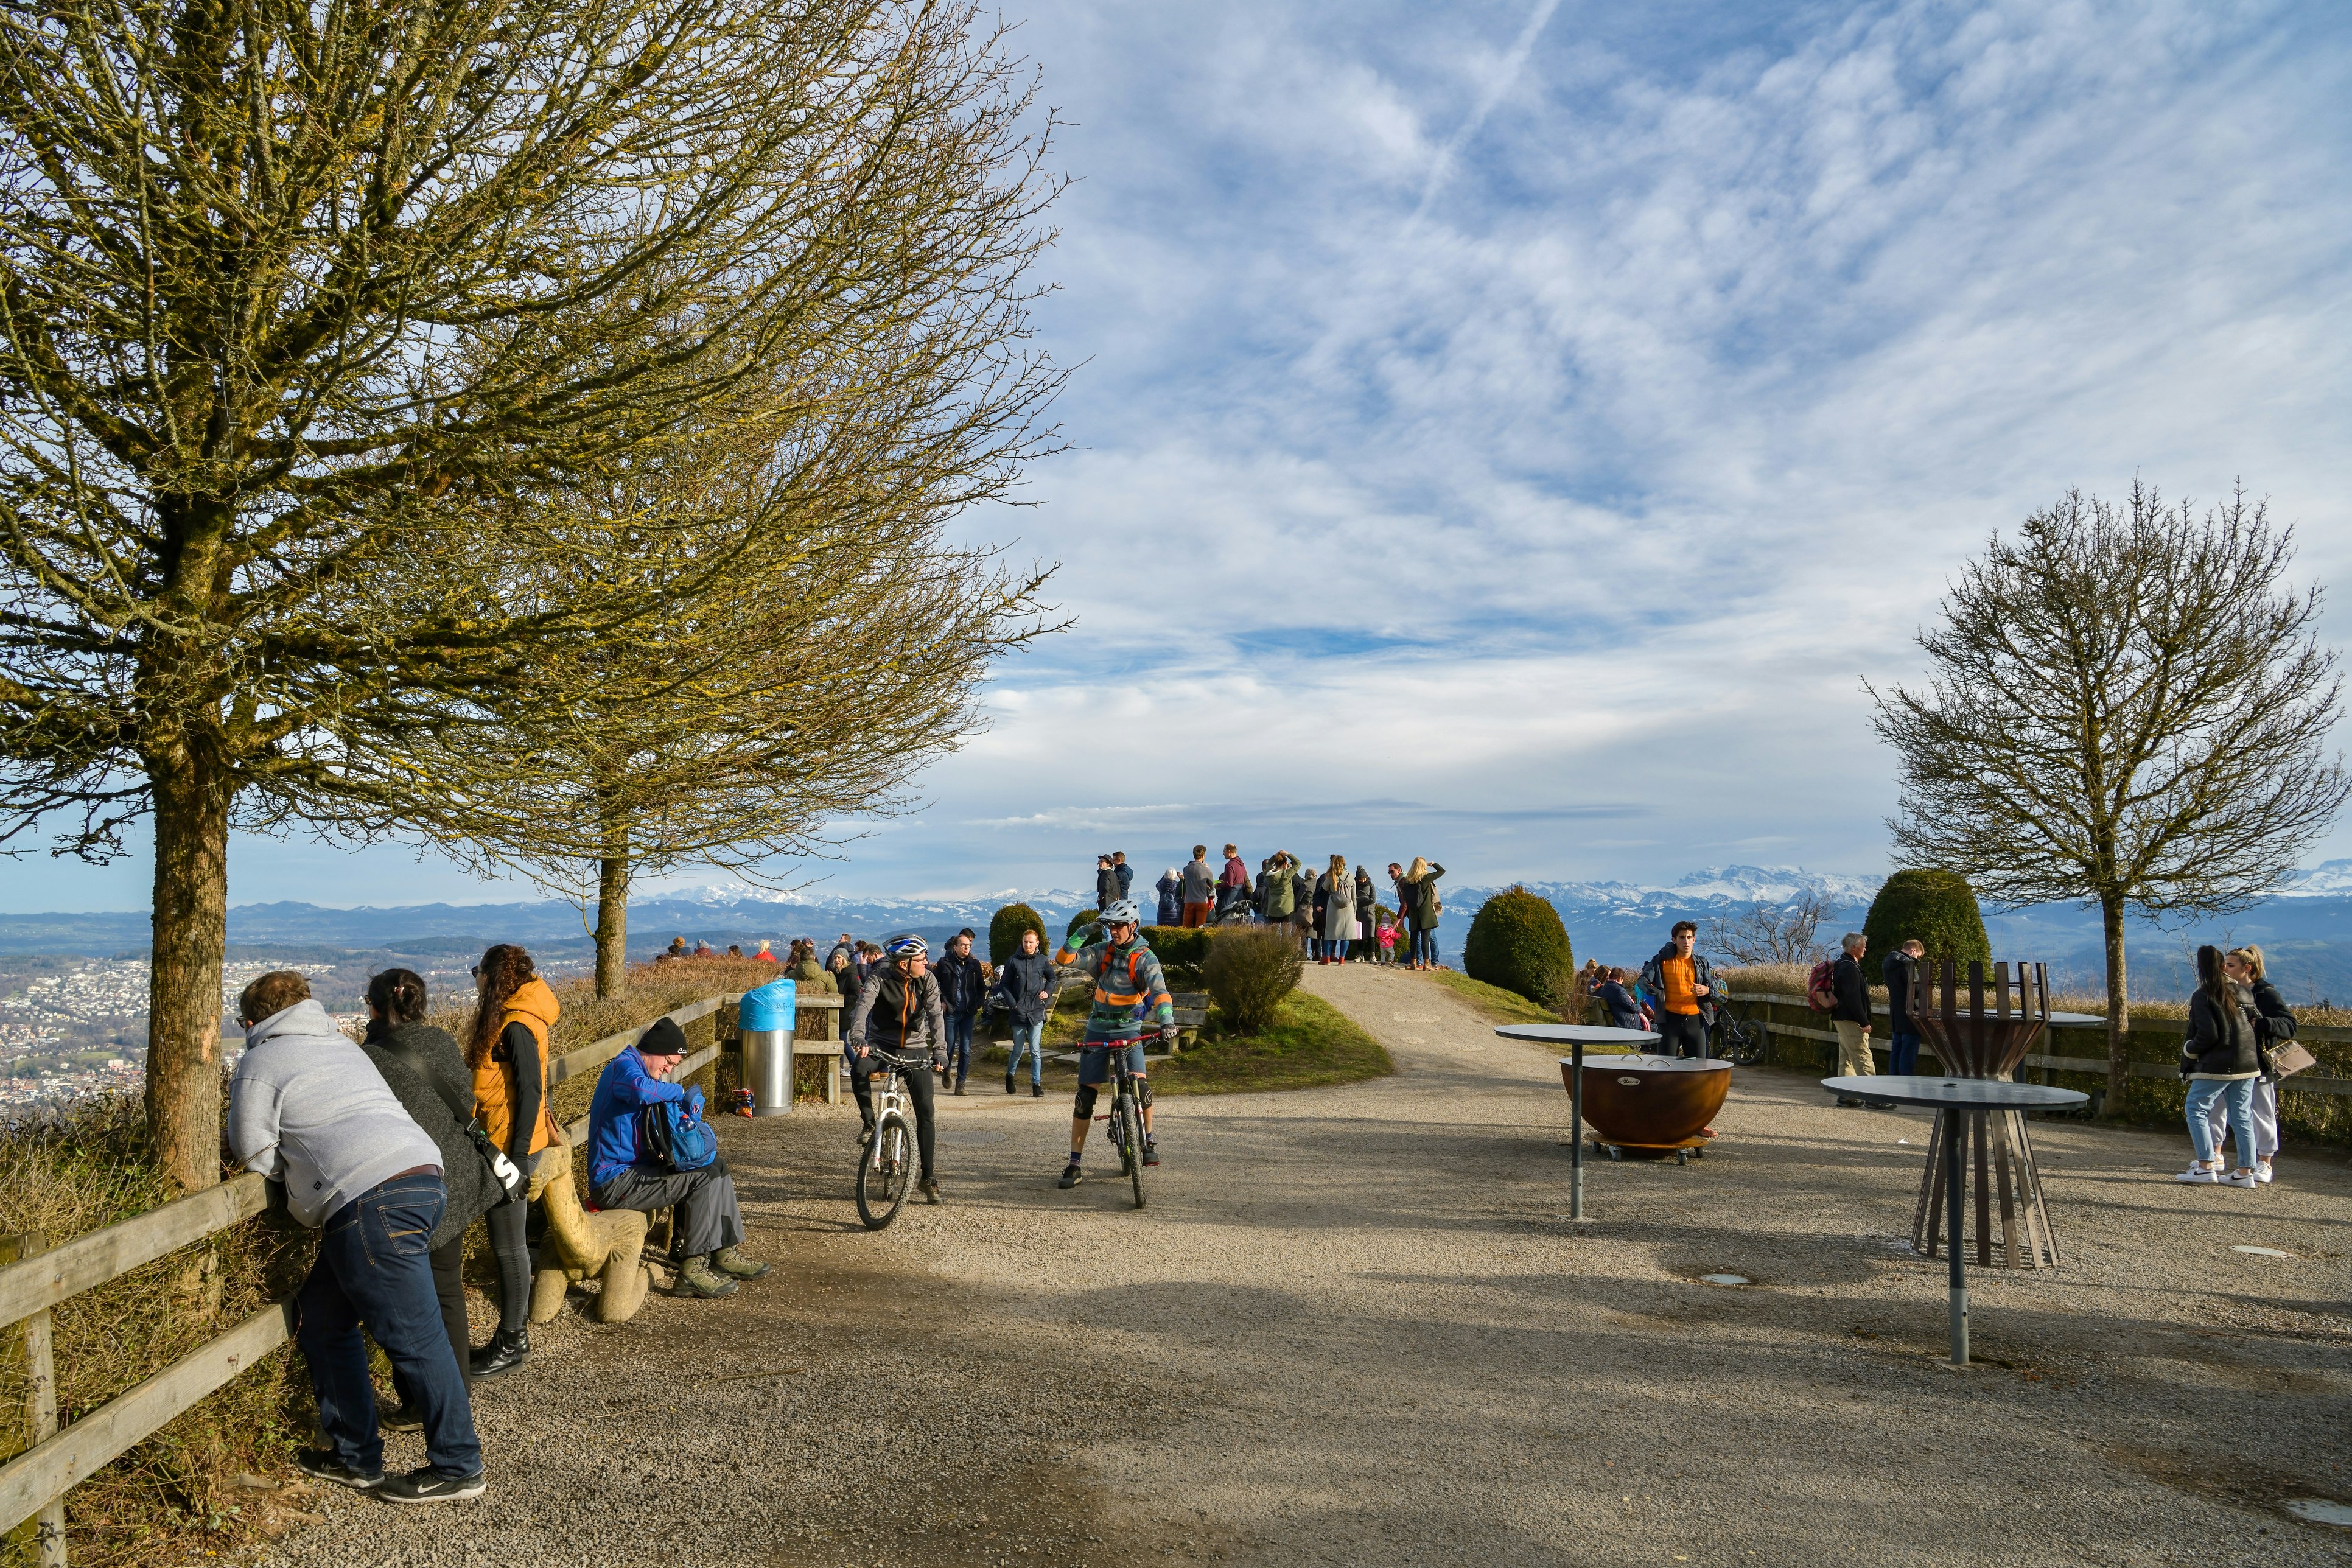 People enjoying their time on observation platform on top of Uetliberg in Switzerland during February 2020